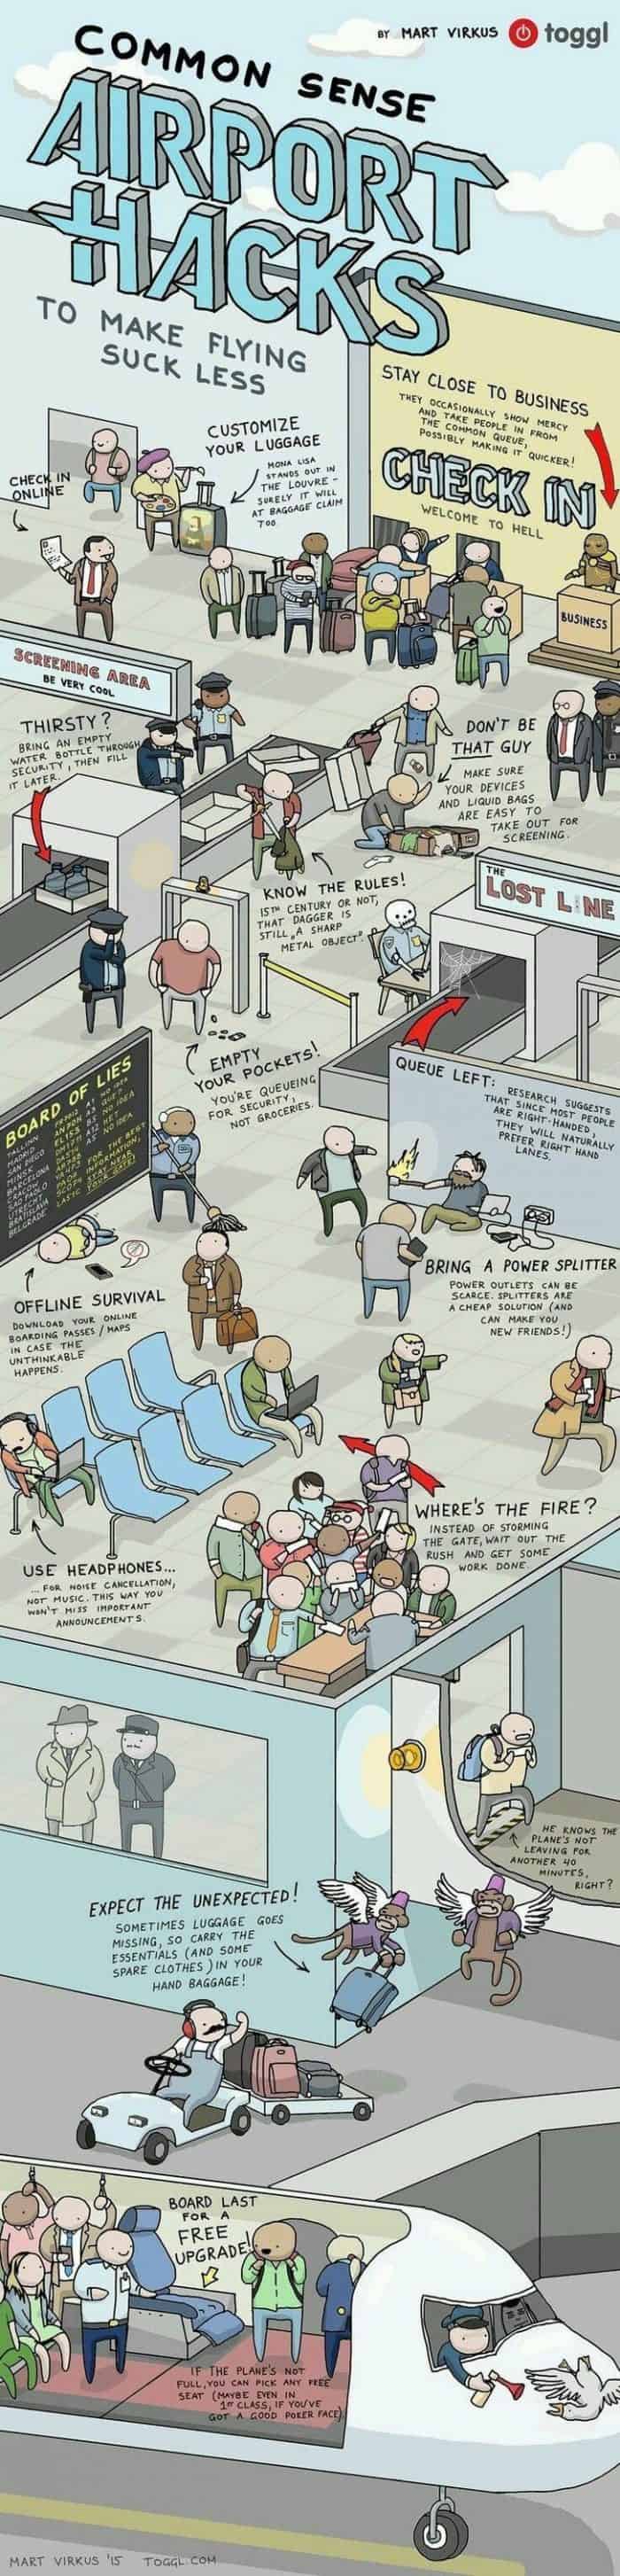 Airport hacks to help one get to their destination safely and on time.